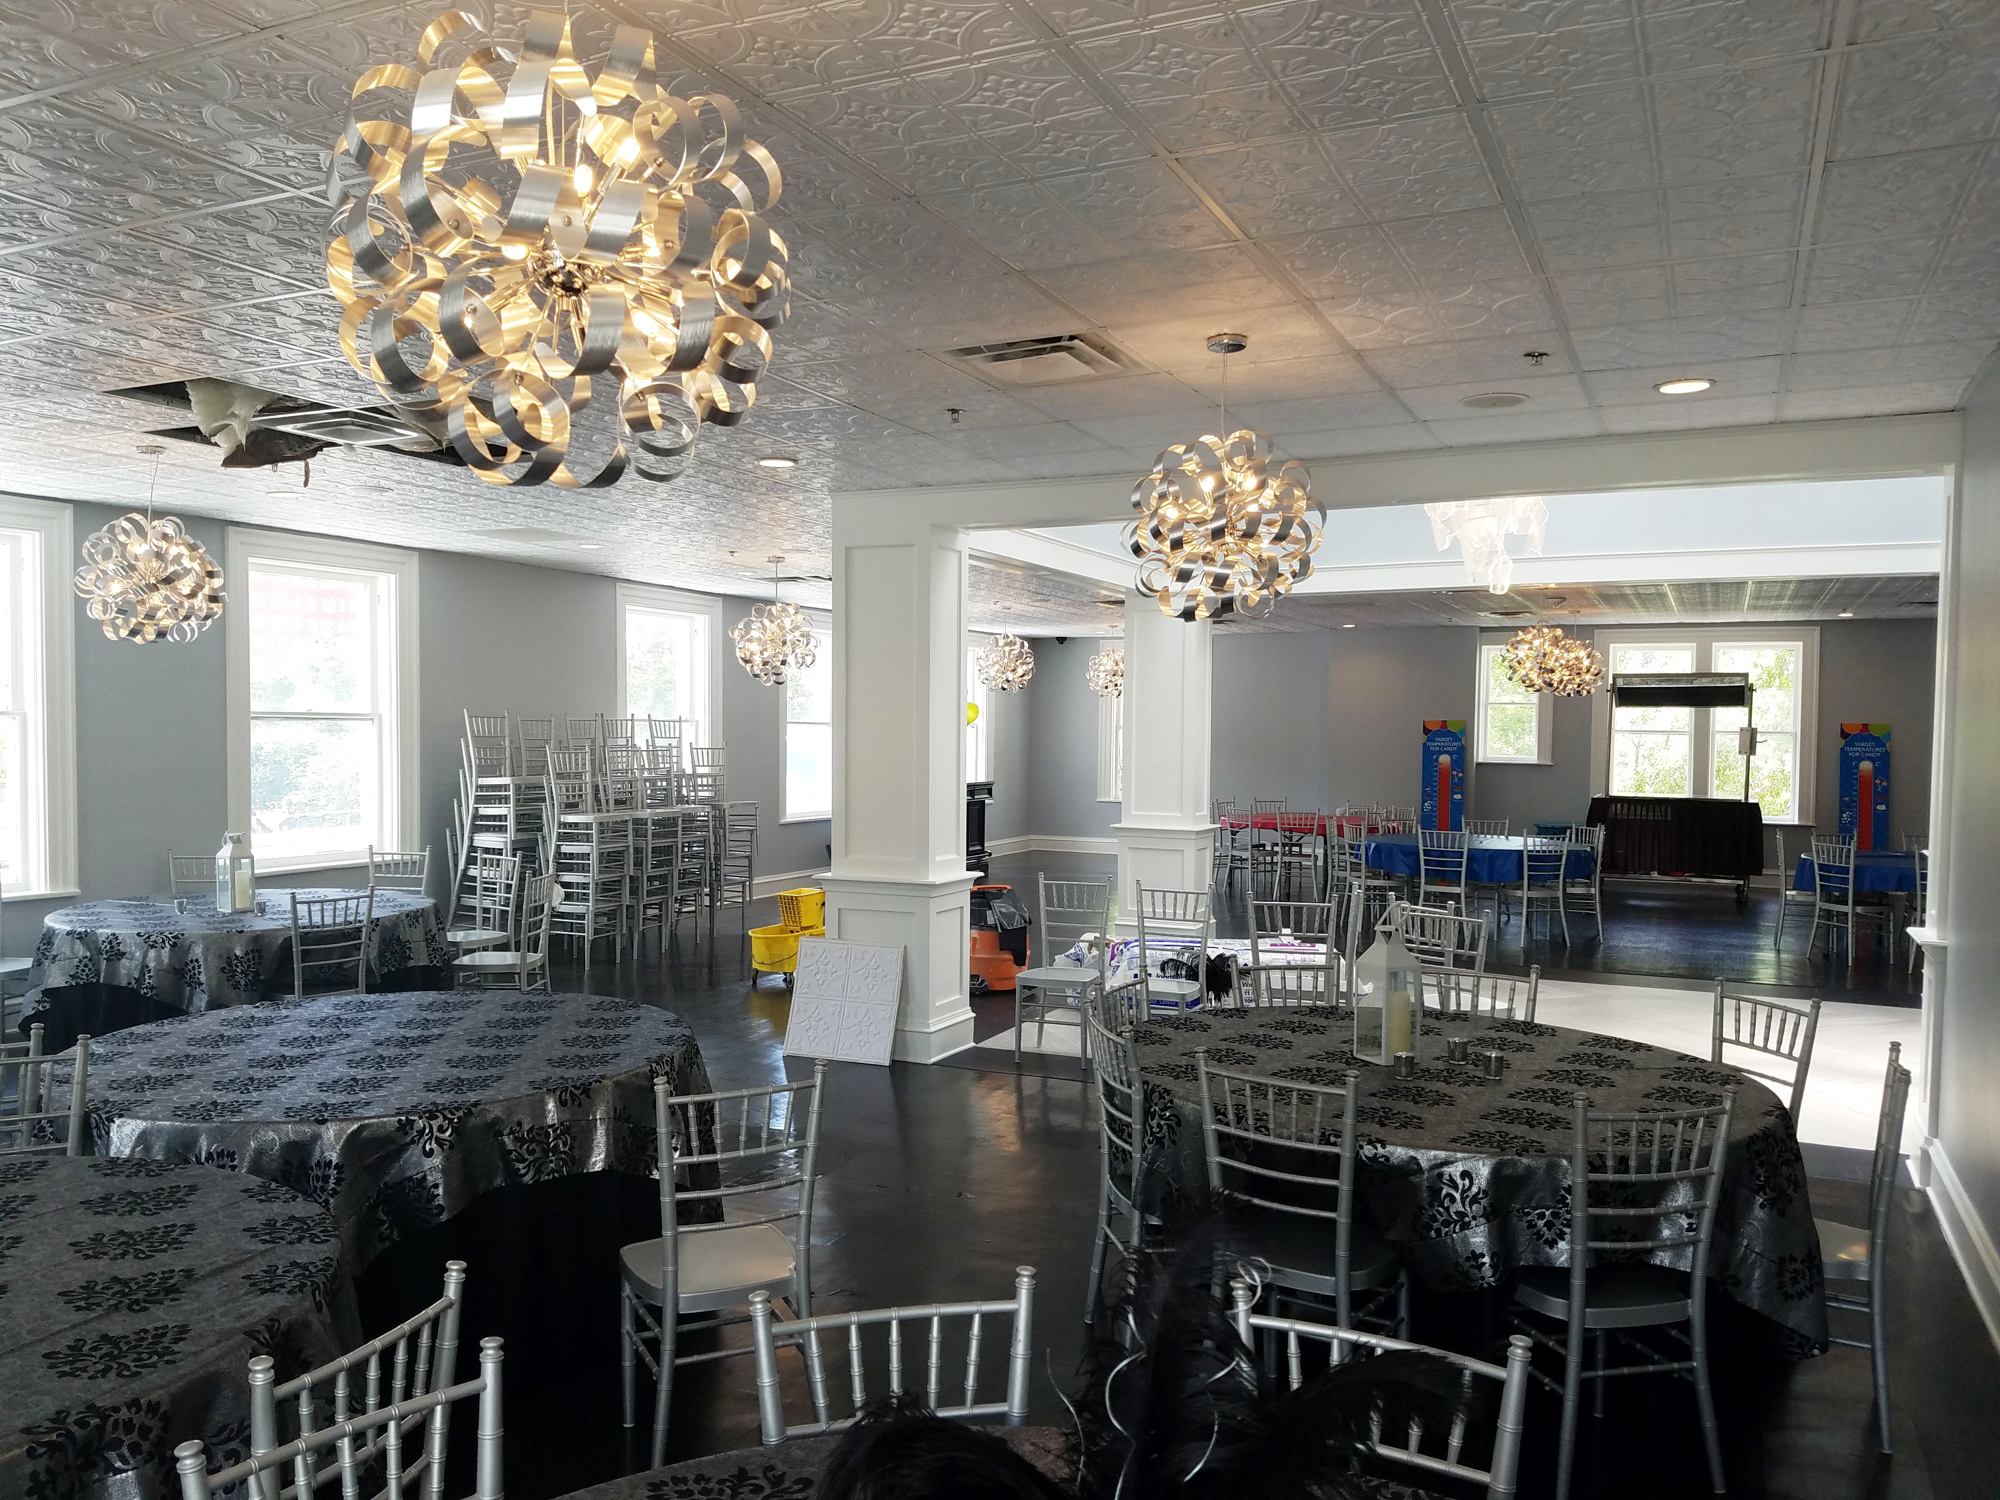 The event space on the third floor of the historic Seminole Building Downtown.